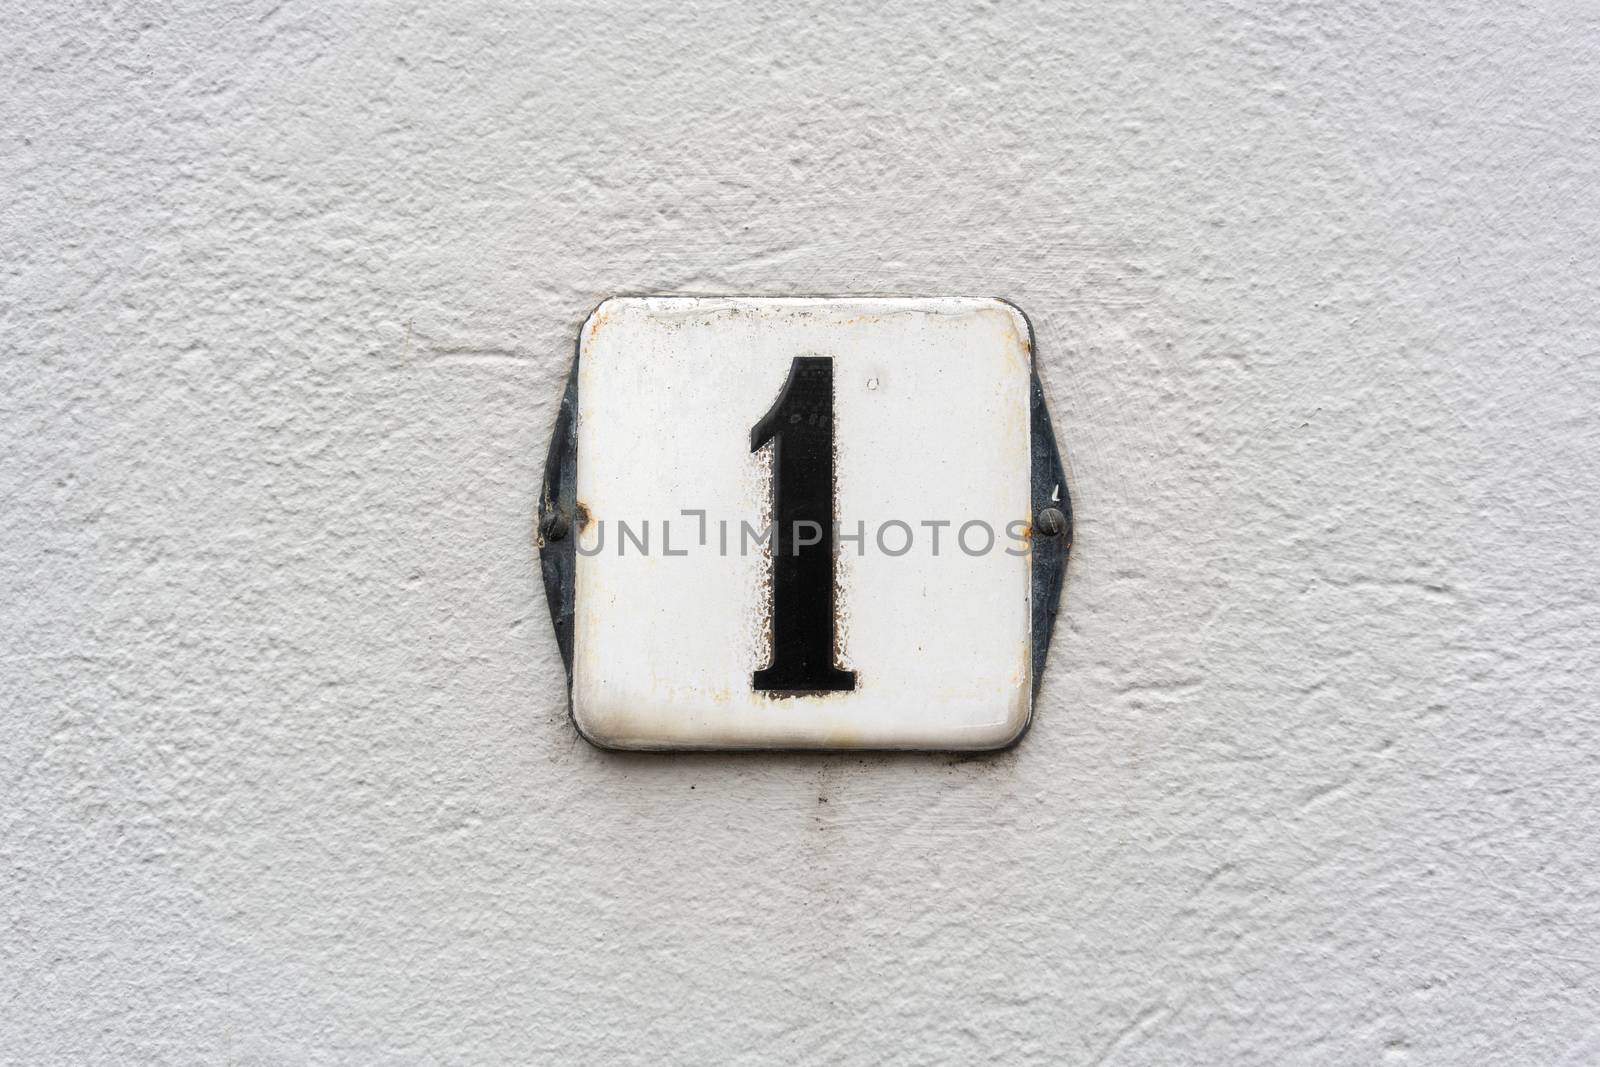 Enameled house number one (1)